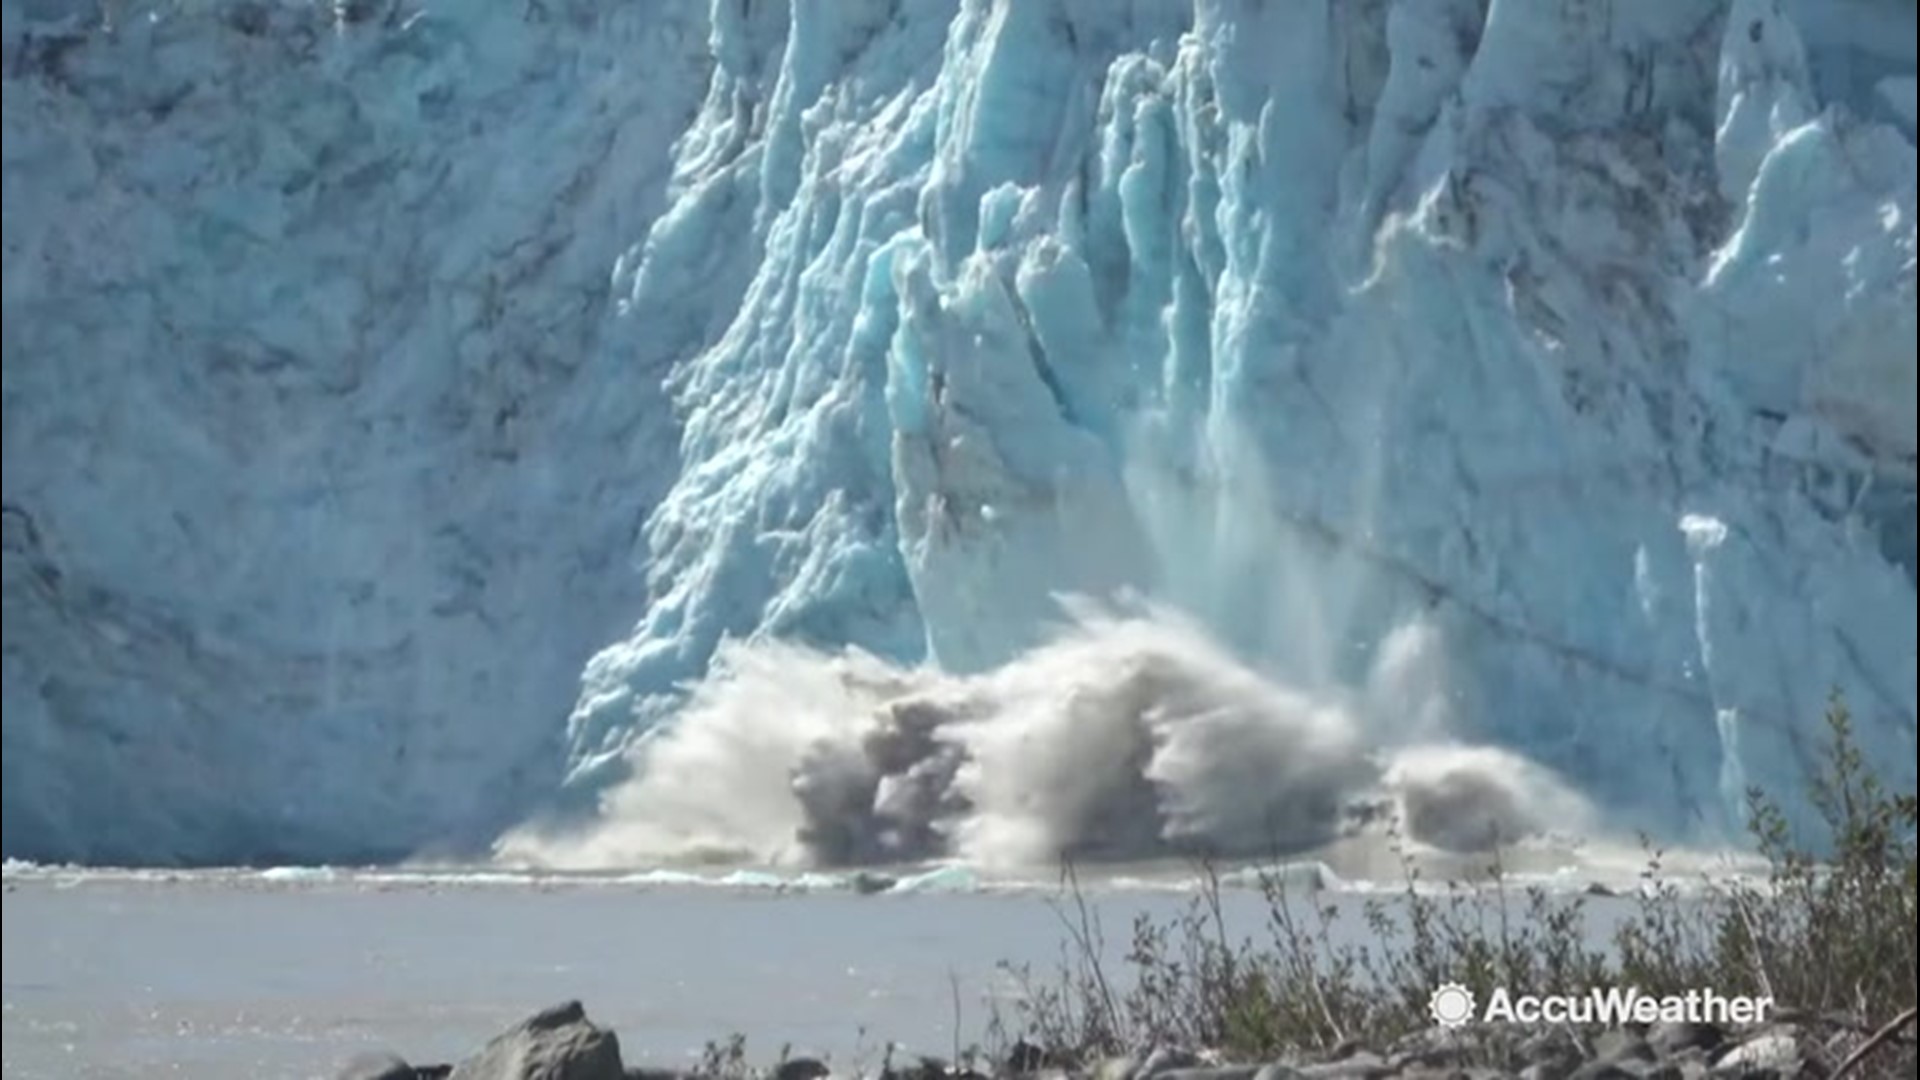 Record temperatures and melting glaciers are changing Alaska right in front of the eyes of people who live and visit the state. AccuWeather's Jonathan Petramala was in Anchorage, Alaska, on August 8, to show how quickly the environment is changing.